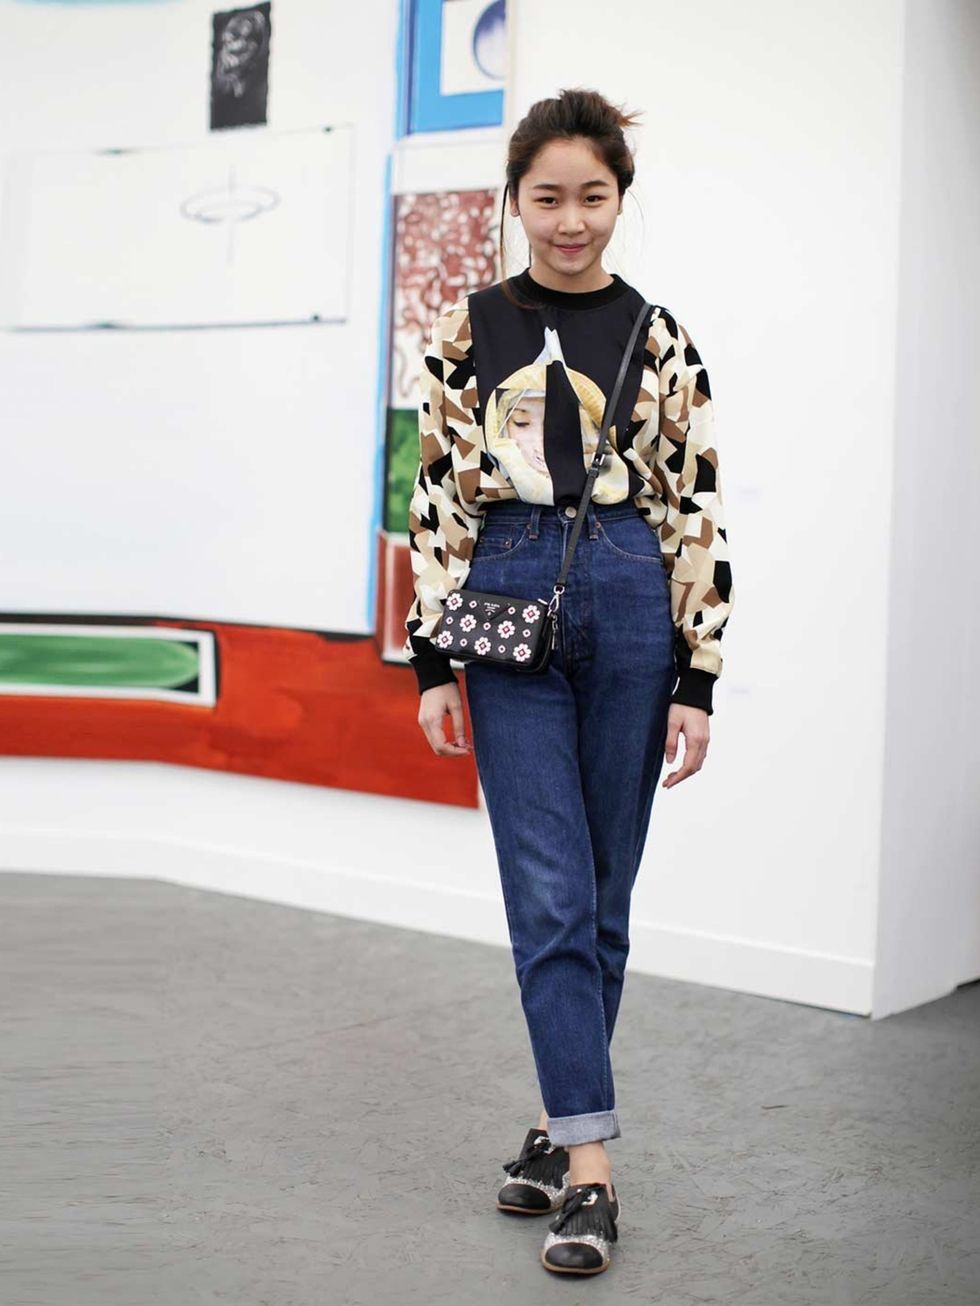 <p>Pound Nithiyaemolarn; From a boutique in Thailand shoes and top; Vintage Jeans, Prada bag</p><p><em><a href="http://www.elleuk.com/star-style/red-carpet/frieze-art-london-2013-kate-moss-tracey-emin">See the stars at Frieze</a></em></p><p><em><a href="h